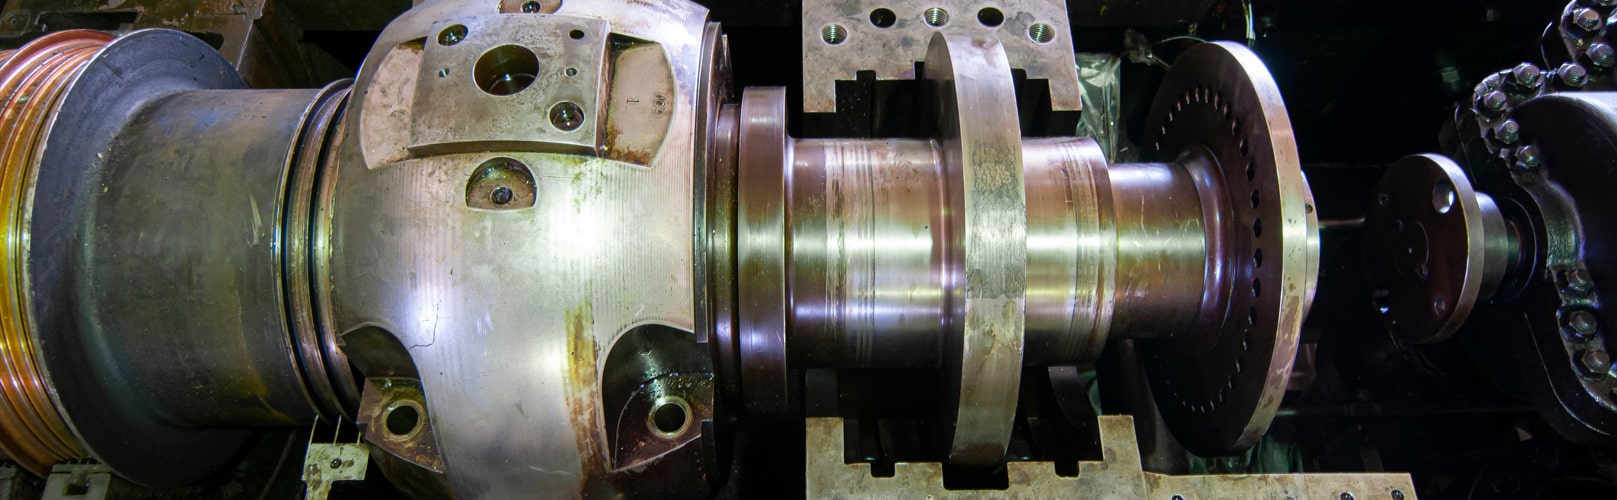 REAL-TIME MONITORING OF BEARING MALFUNCTIONS AND DEFORMATION